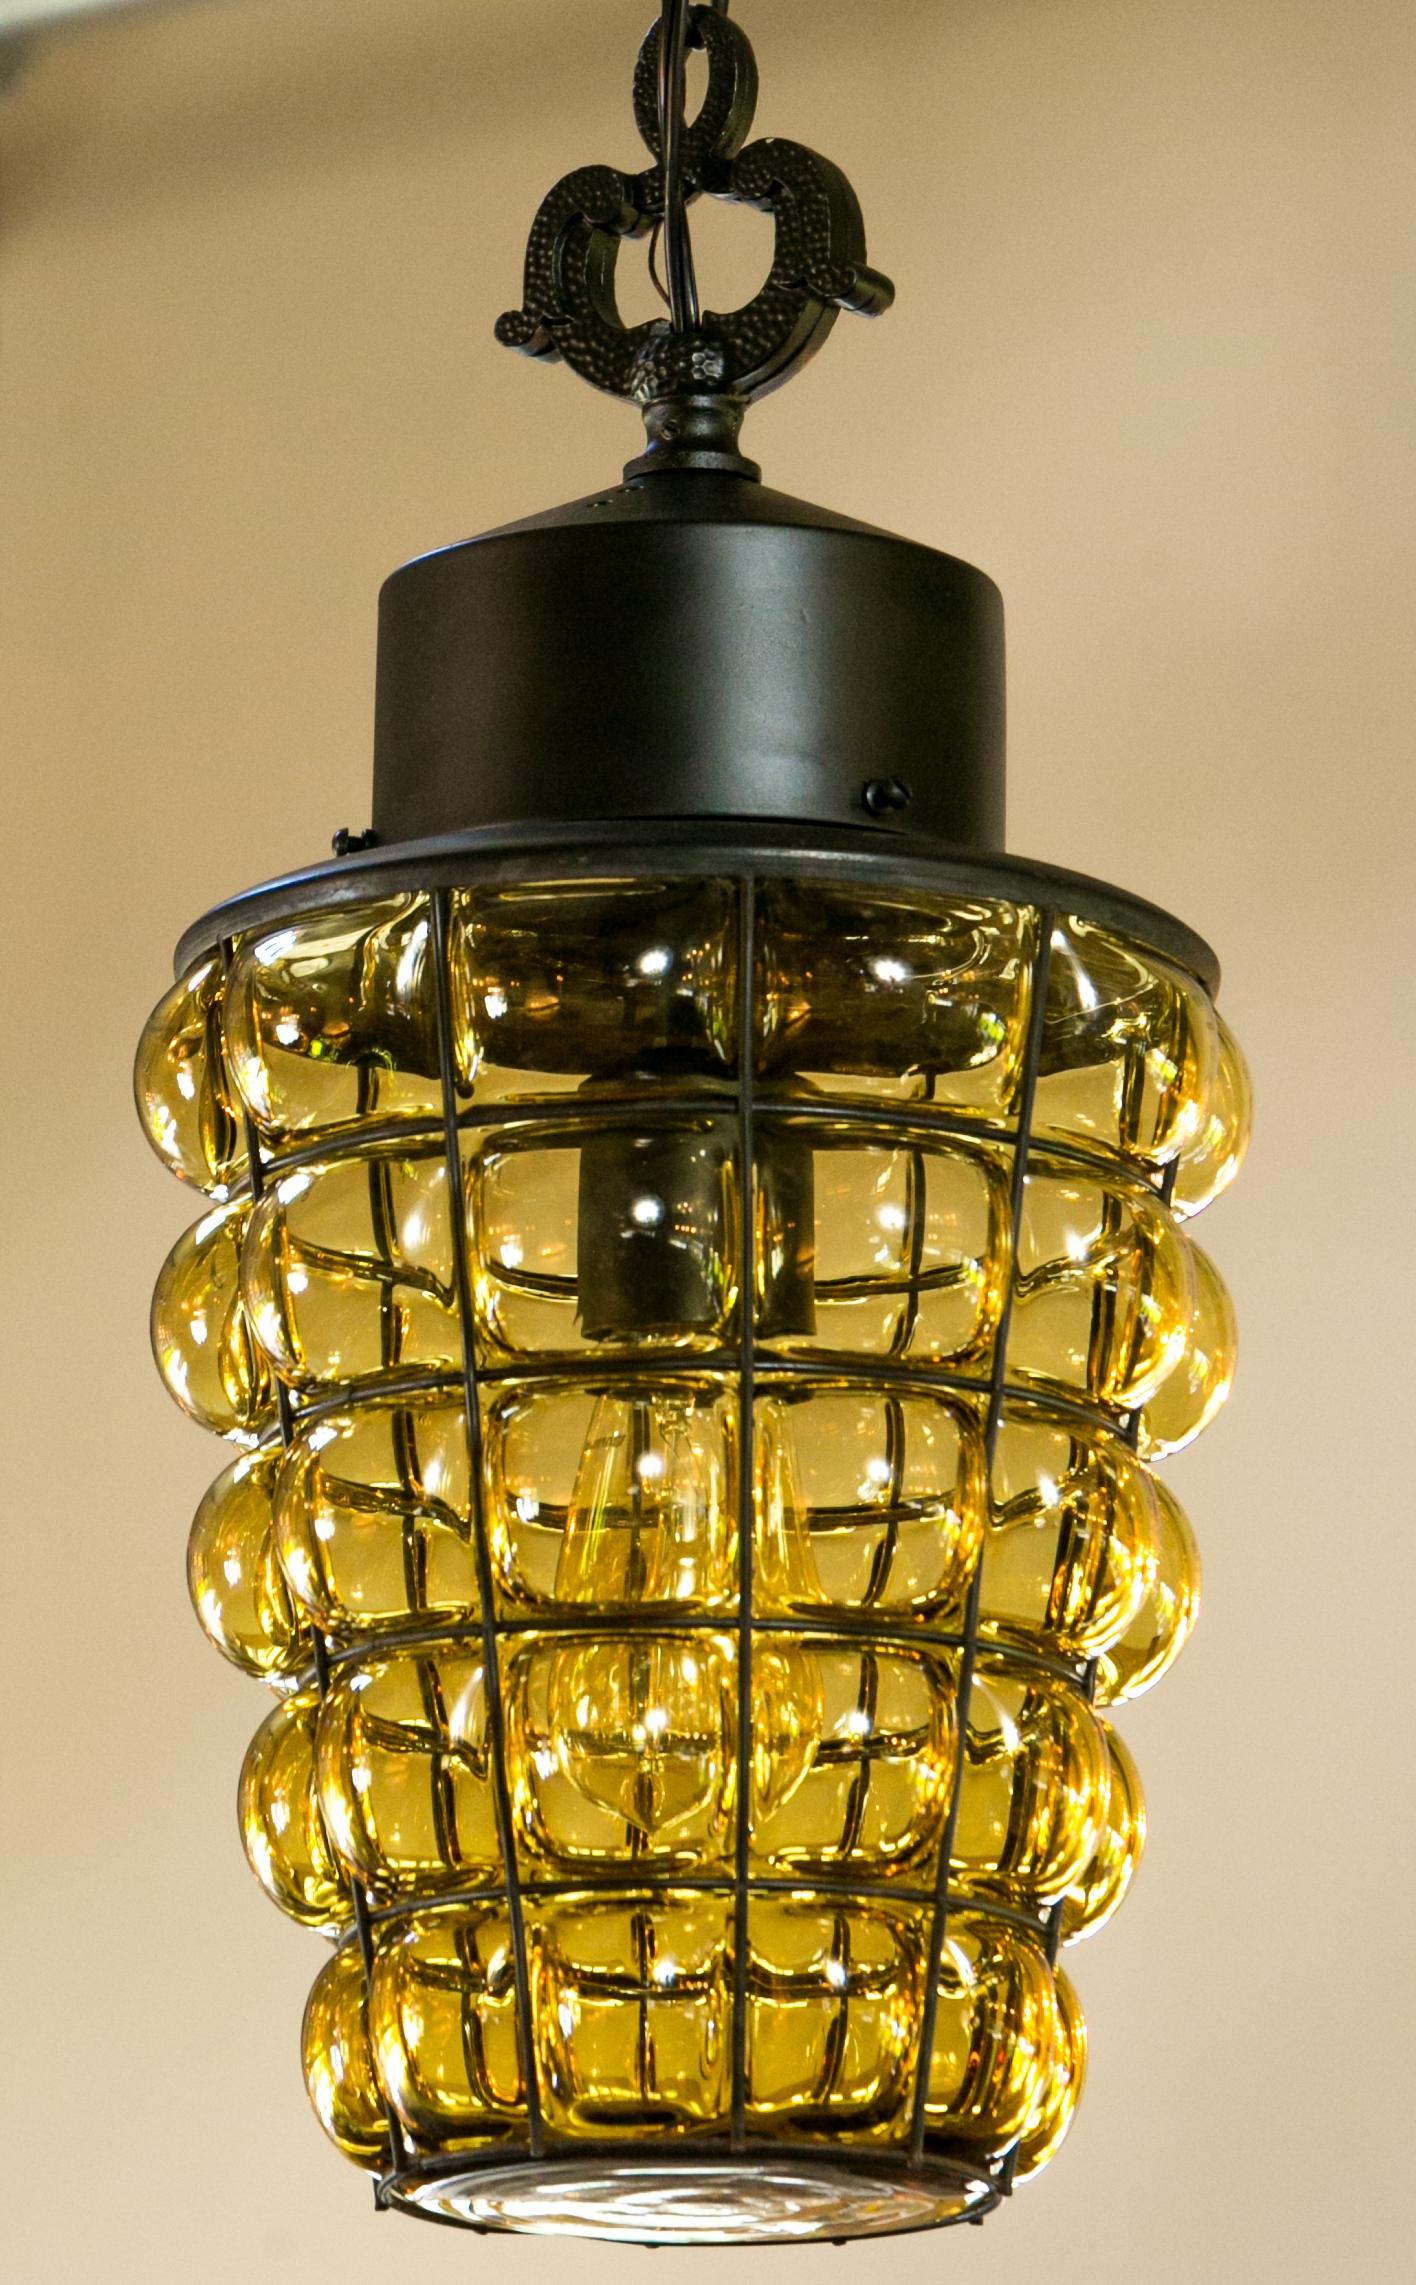 Spanish Colonial caged glass lantern with single medium-base (Edison) light. Black painted wrought iron with a yellow/amber transparent glass piece encased by a wrought iron honeycomb style frame. In this style of light the glass is generally hand